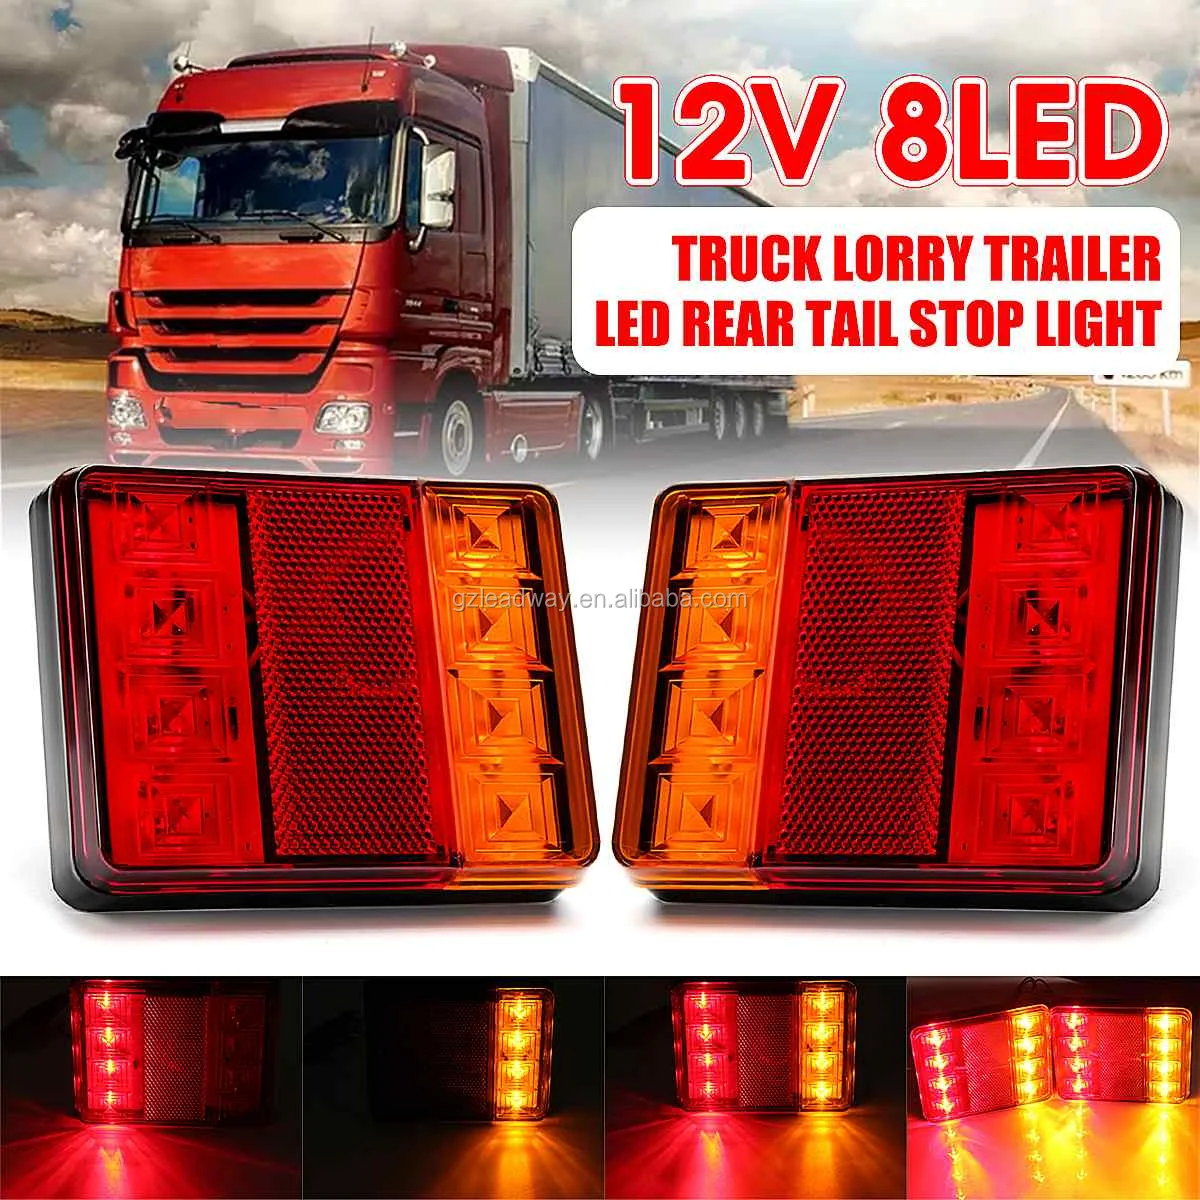 2X REAR TAIL STOP REVERSE WINKER LIGHTS LAMPS FOR COMMERCIAL VEHICLES UNIVERSAL